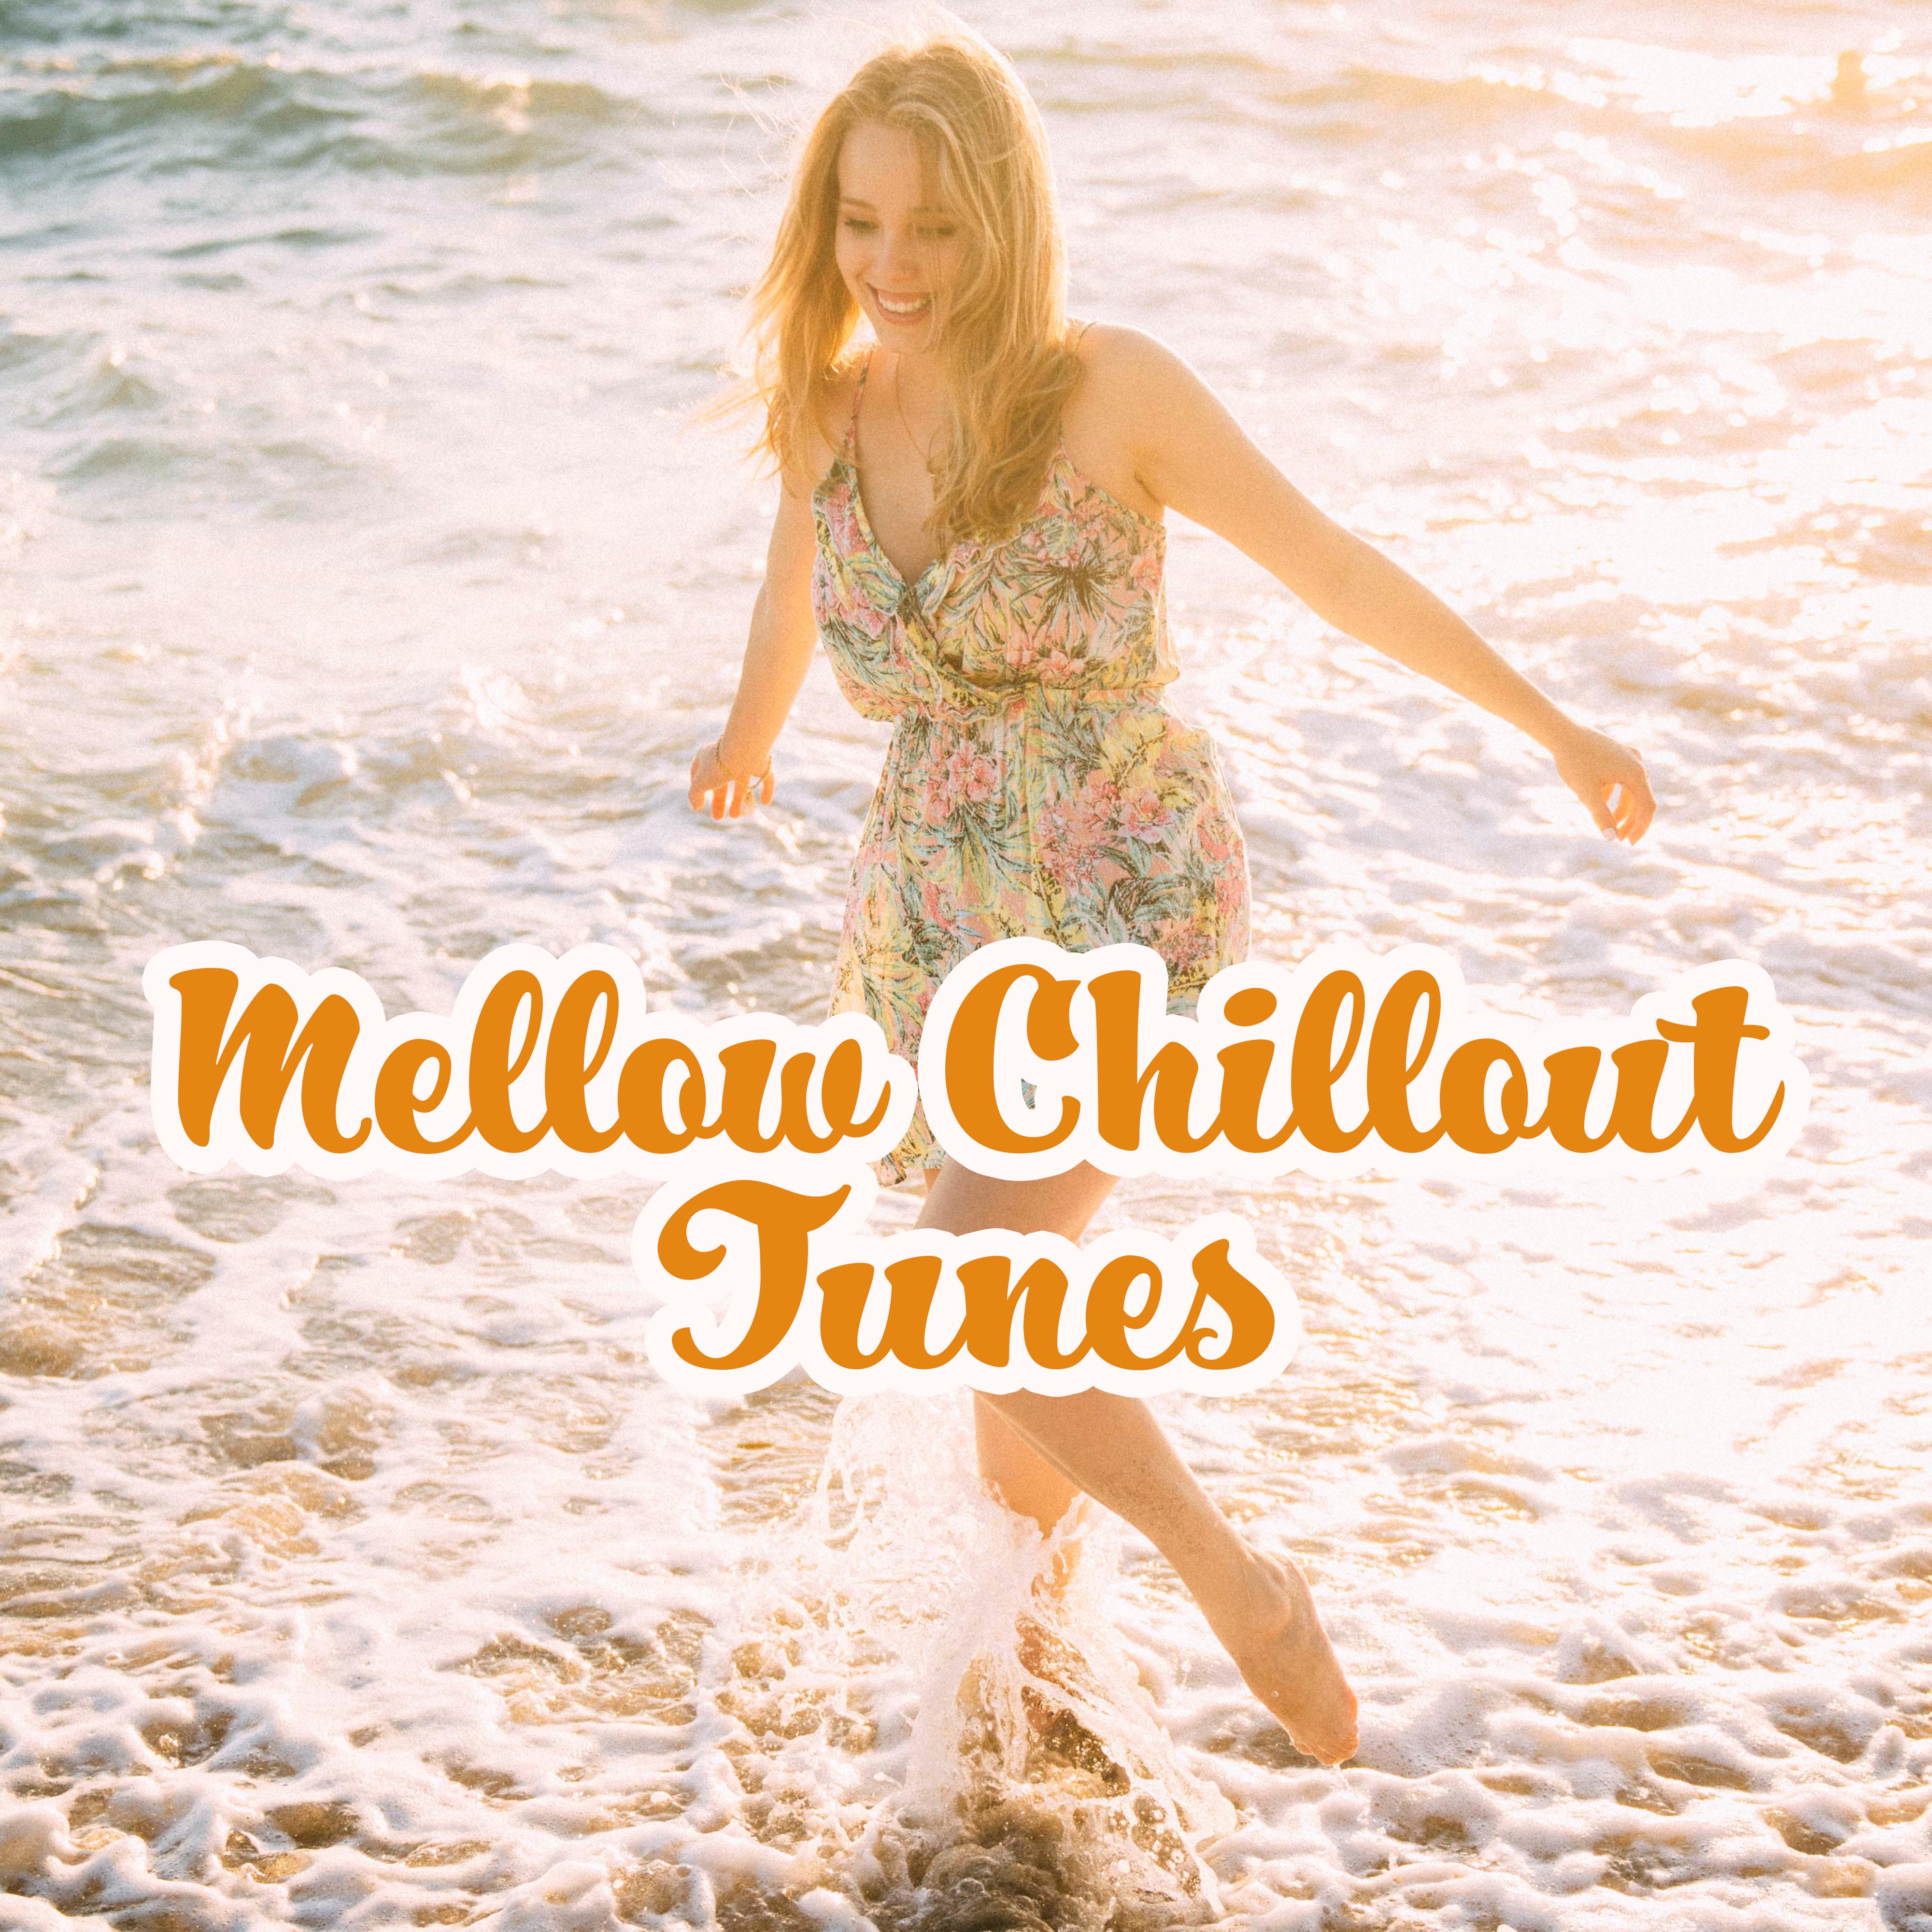 Mellow Chillout Tunes: Gentle Sounds of Chillout Music to Rest, Calm Down and Chill Out